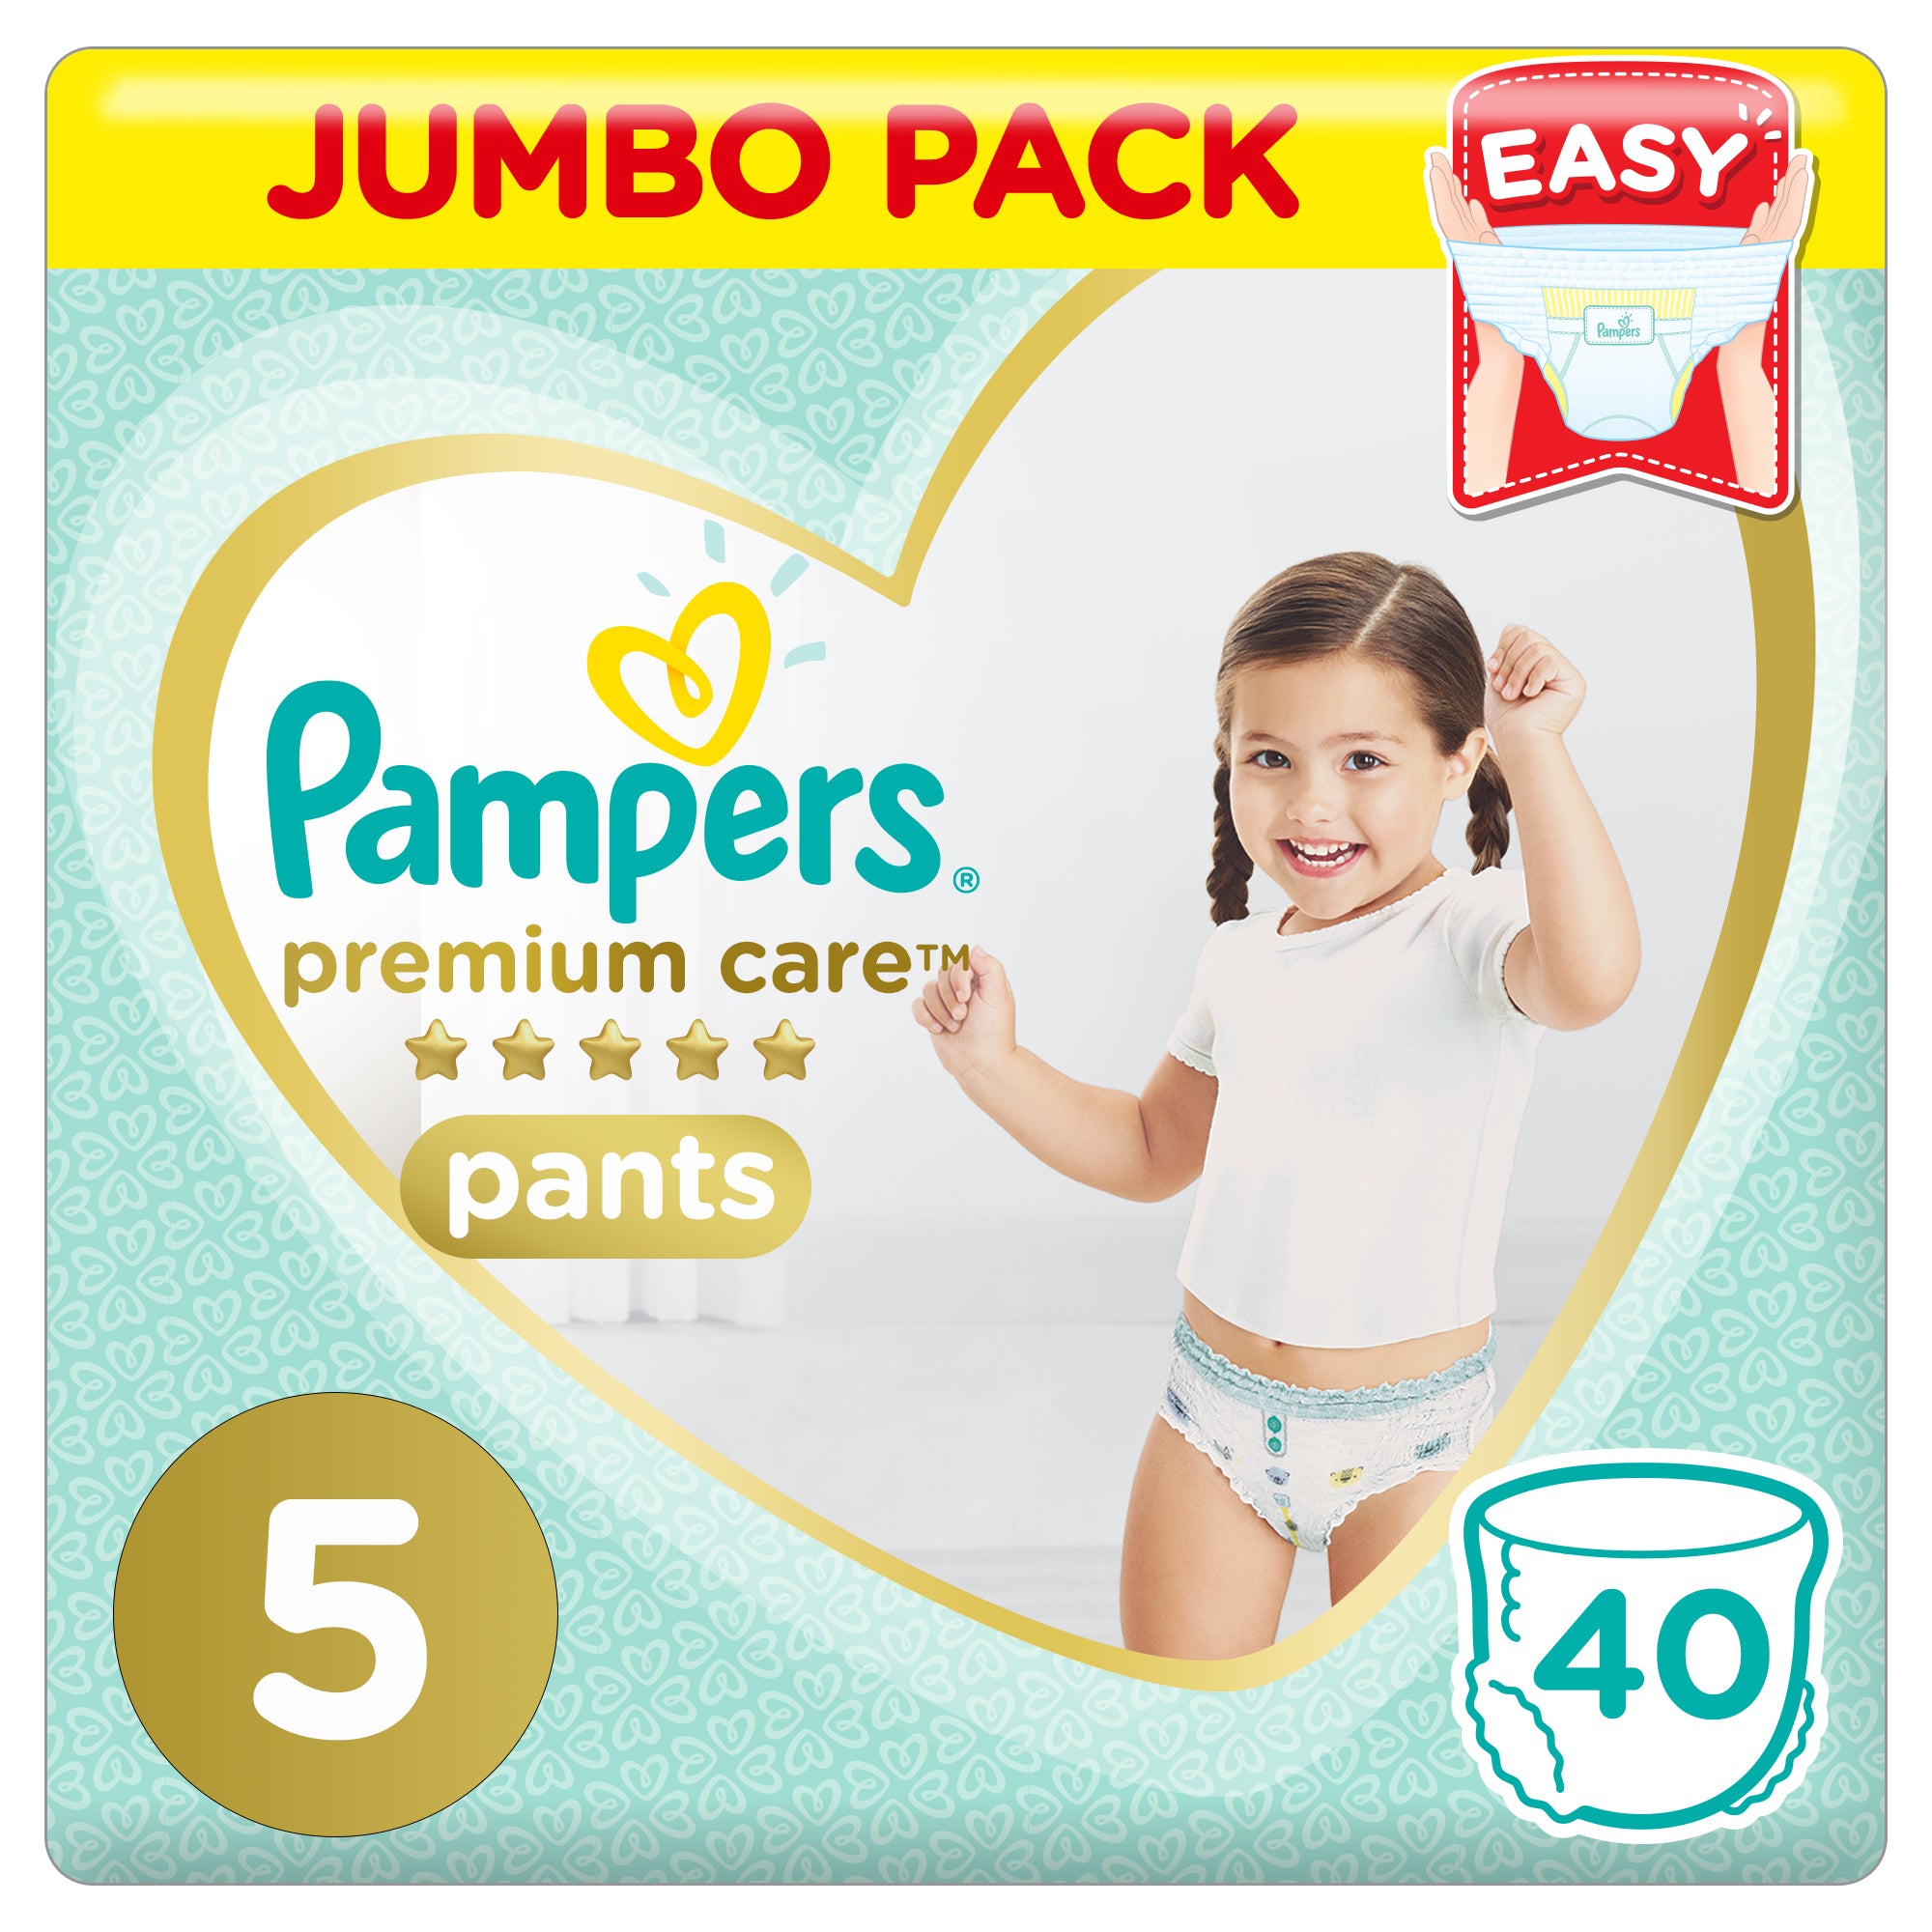 Presko feeling all day: Find out why parents are all praises for Pampers'  new Aircon Pants